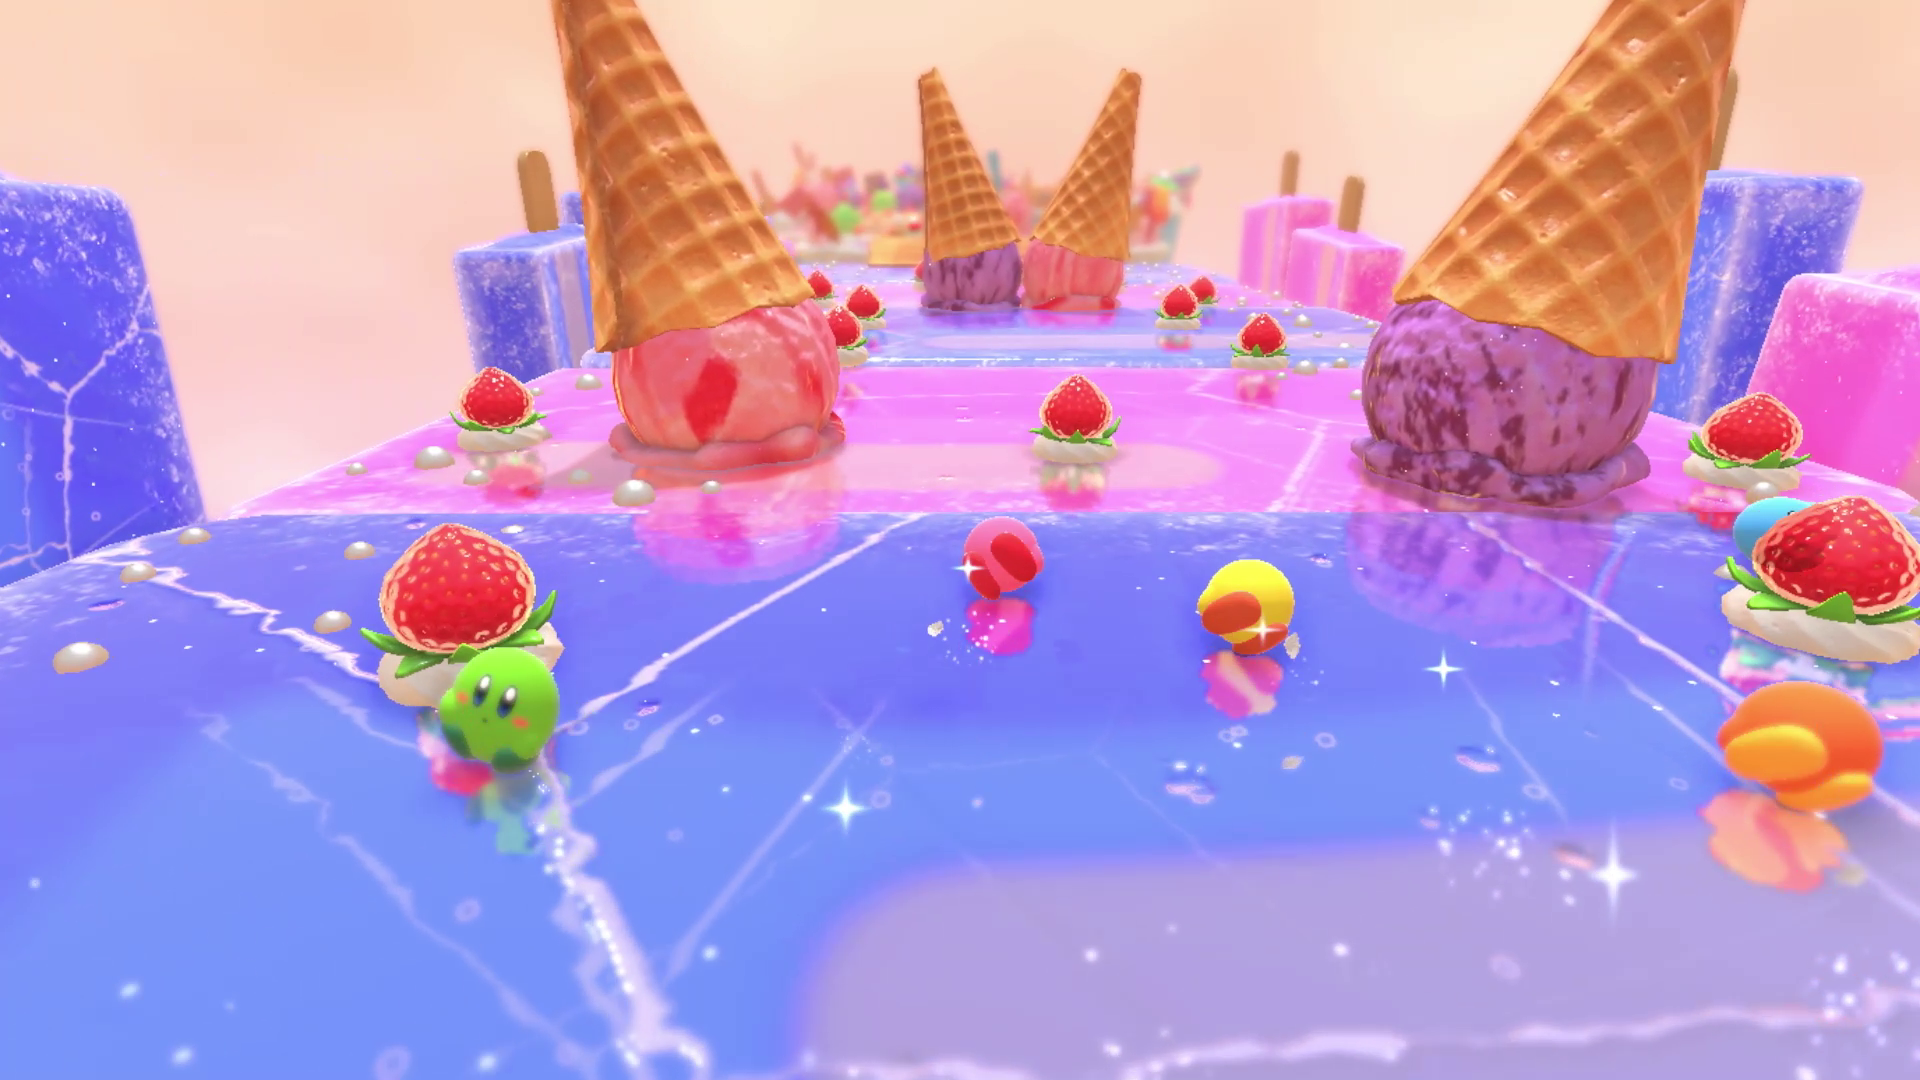 This Game Will Make YOU HUNGRY! (Kirby's Dream Buffet) 